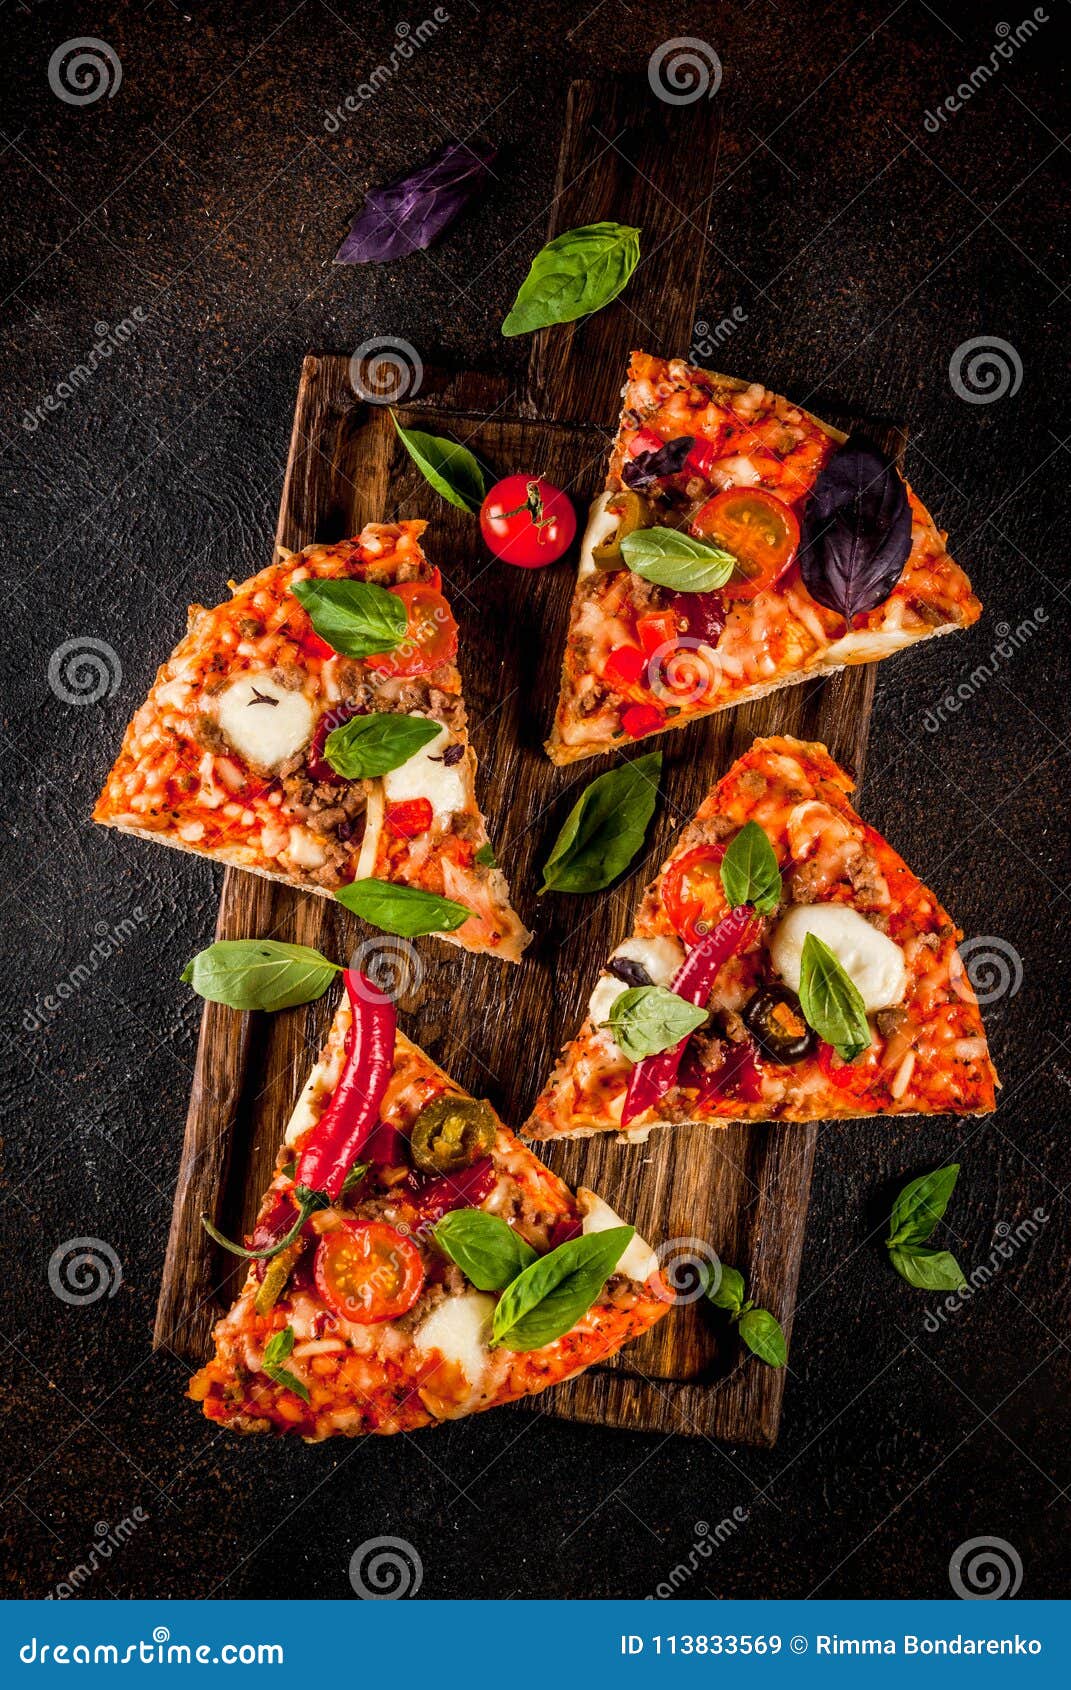 Pizza and red wine stock image. Image of snack, meat - 113833569